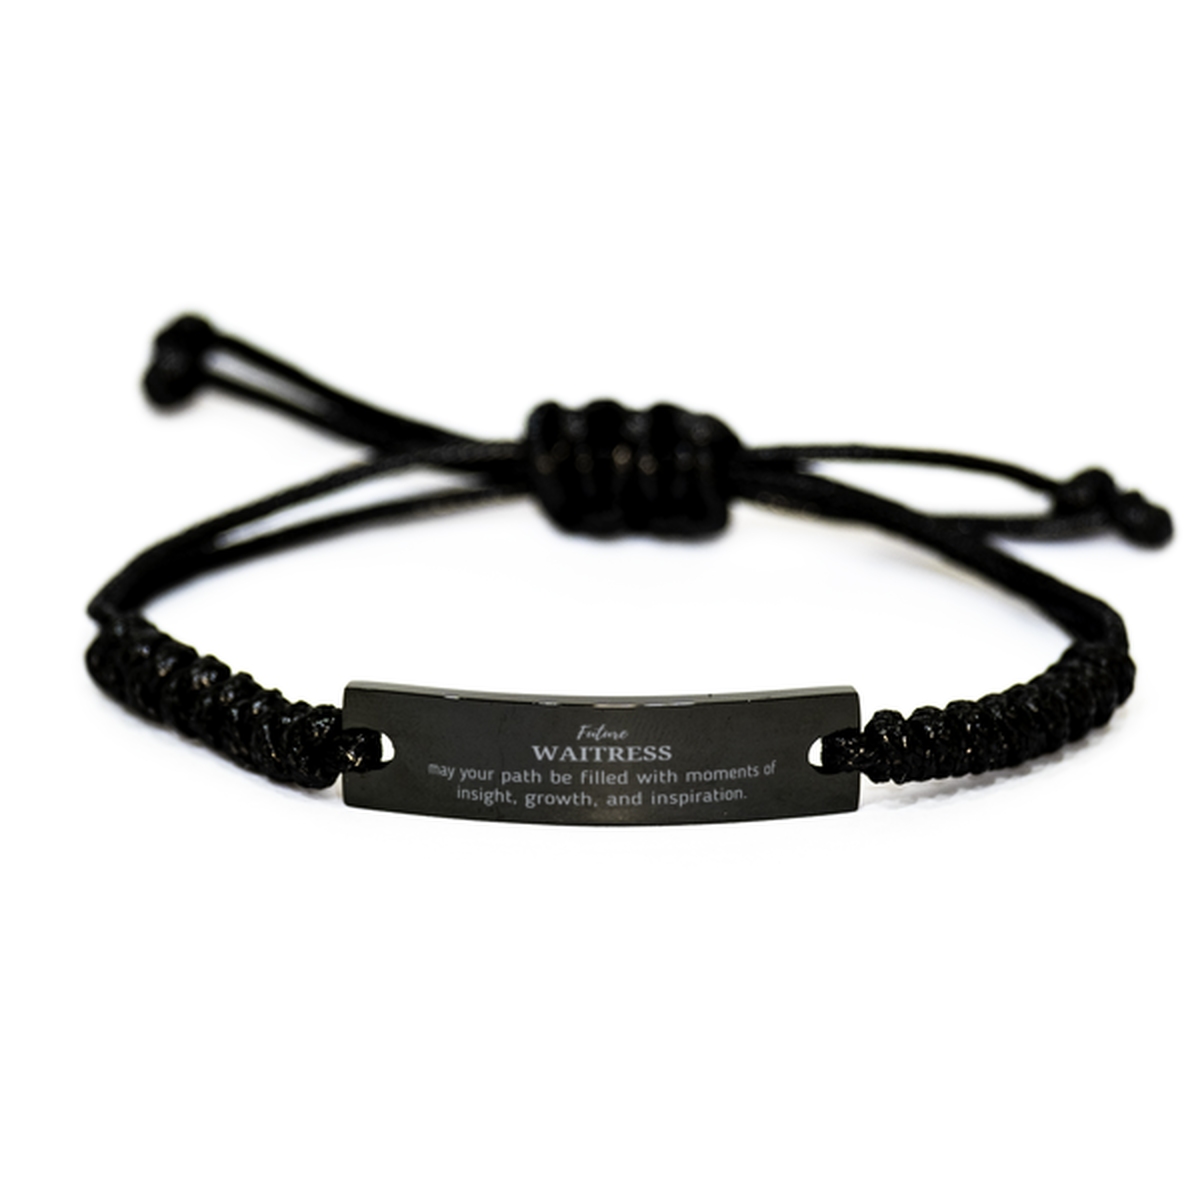 Future Waitress Gifts, May your path be filled with moments of insight, Graduation Gifts for New Waitress, Christmas Unique Black Rope Bracelet For Men, Women, Friends